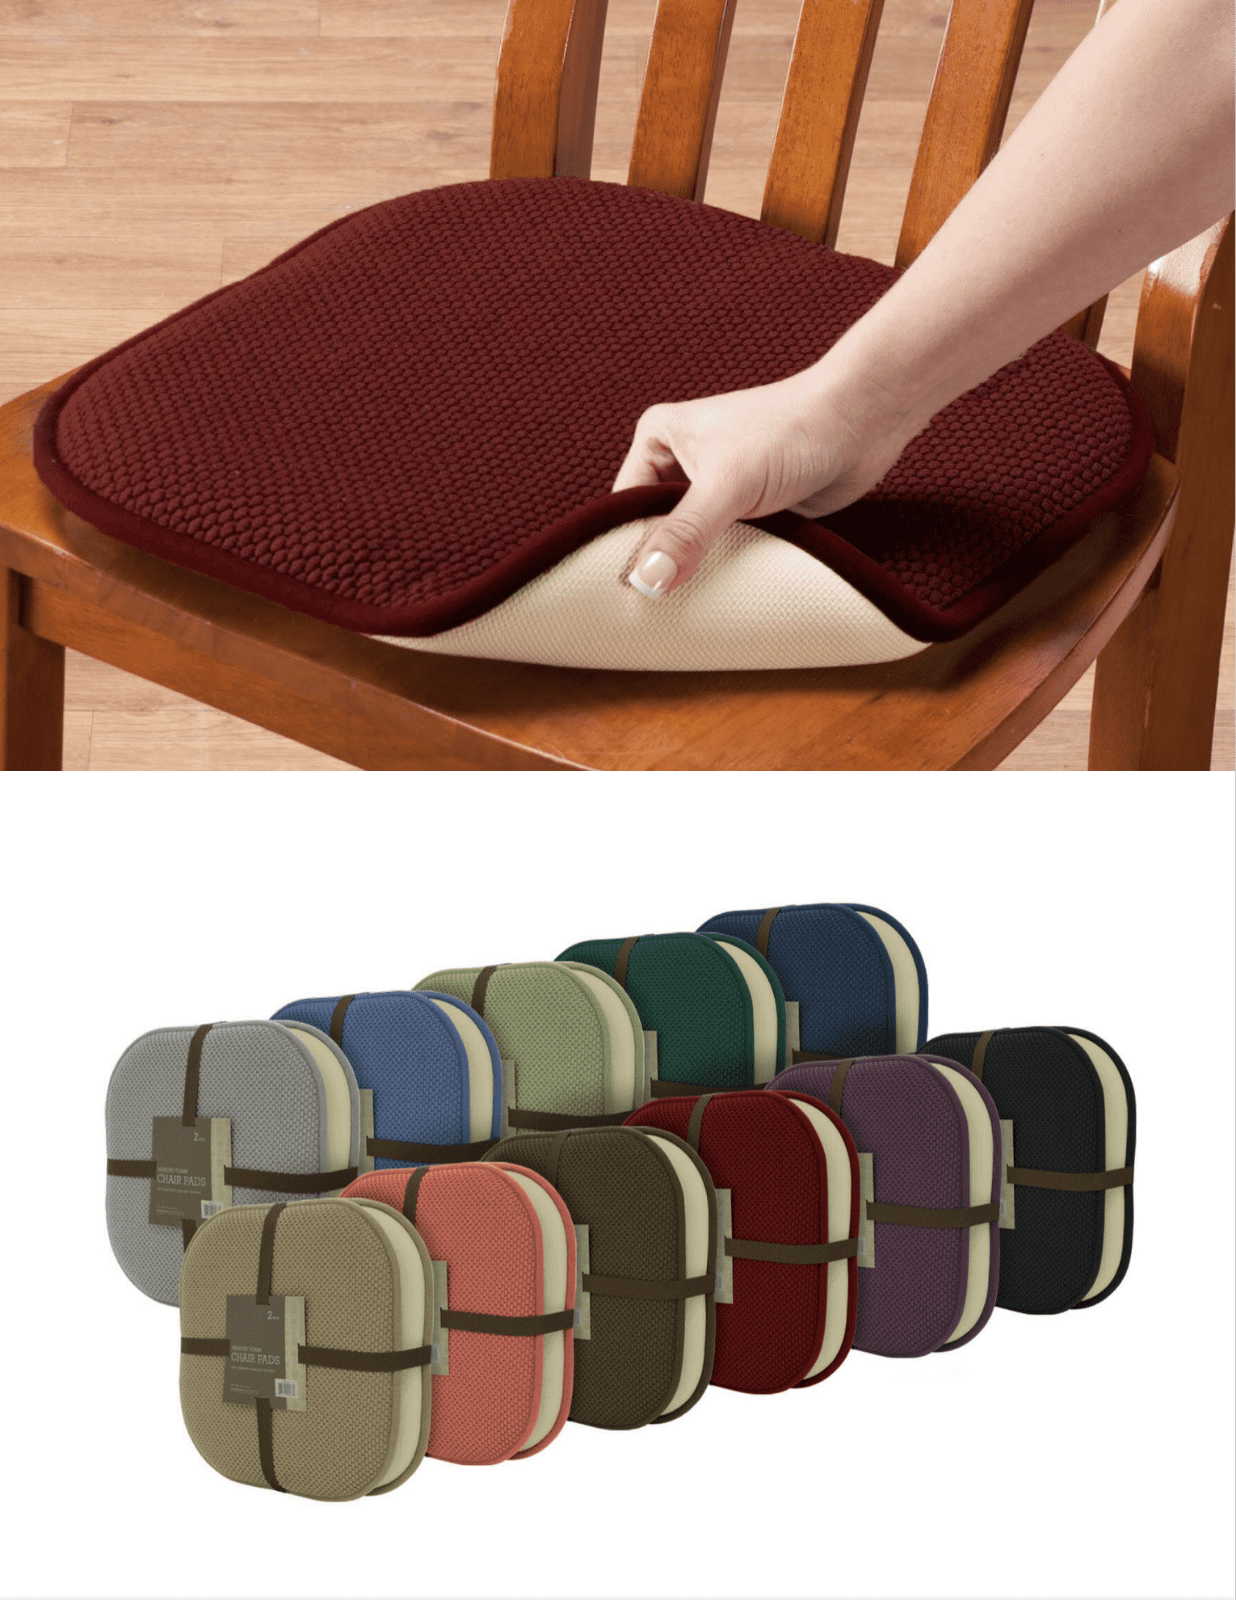 Mainstays Faux Suede 14.5 Chair Cushion with Ties,4 Pack,Brownstone NEW FREESHIP 